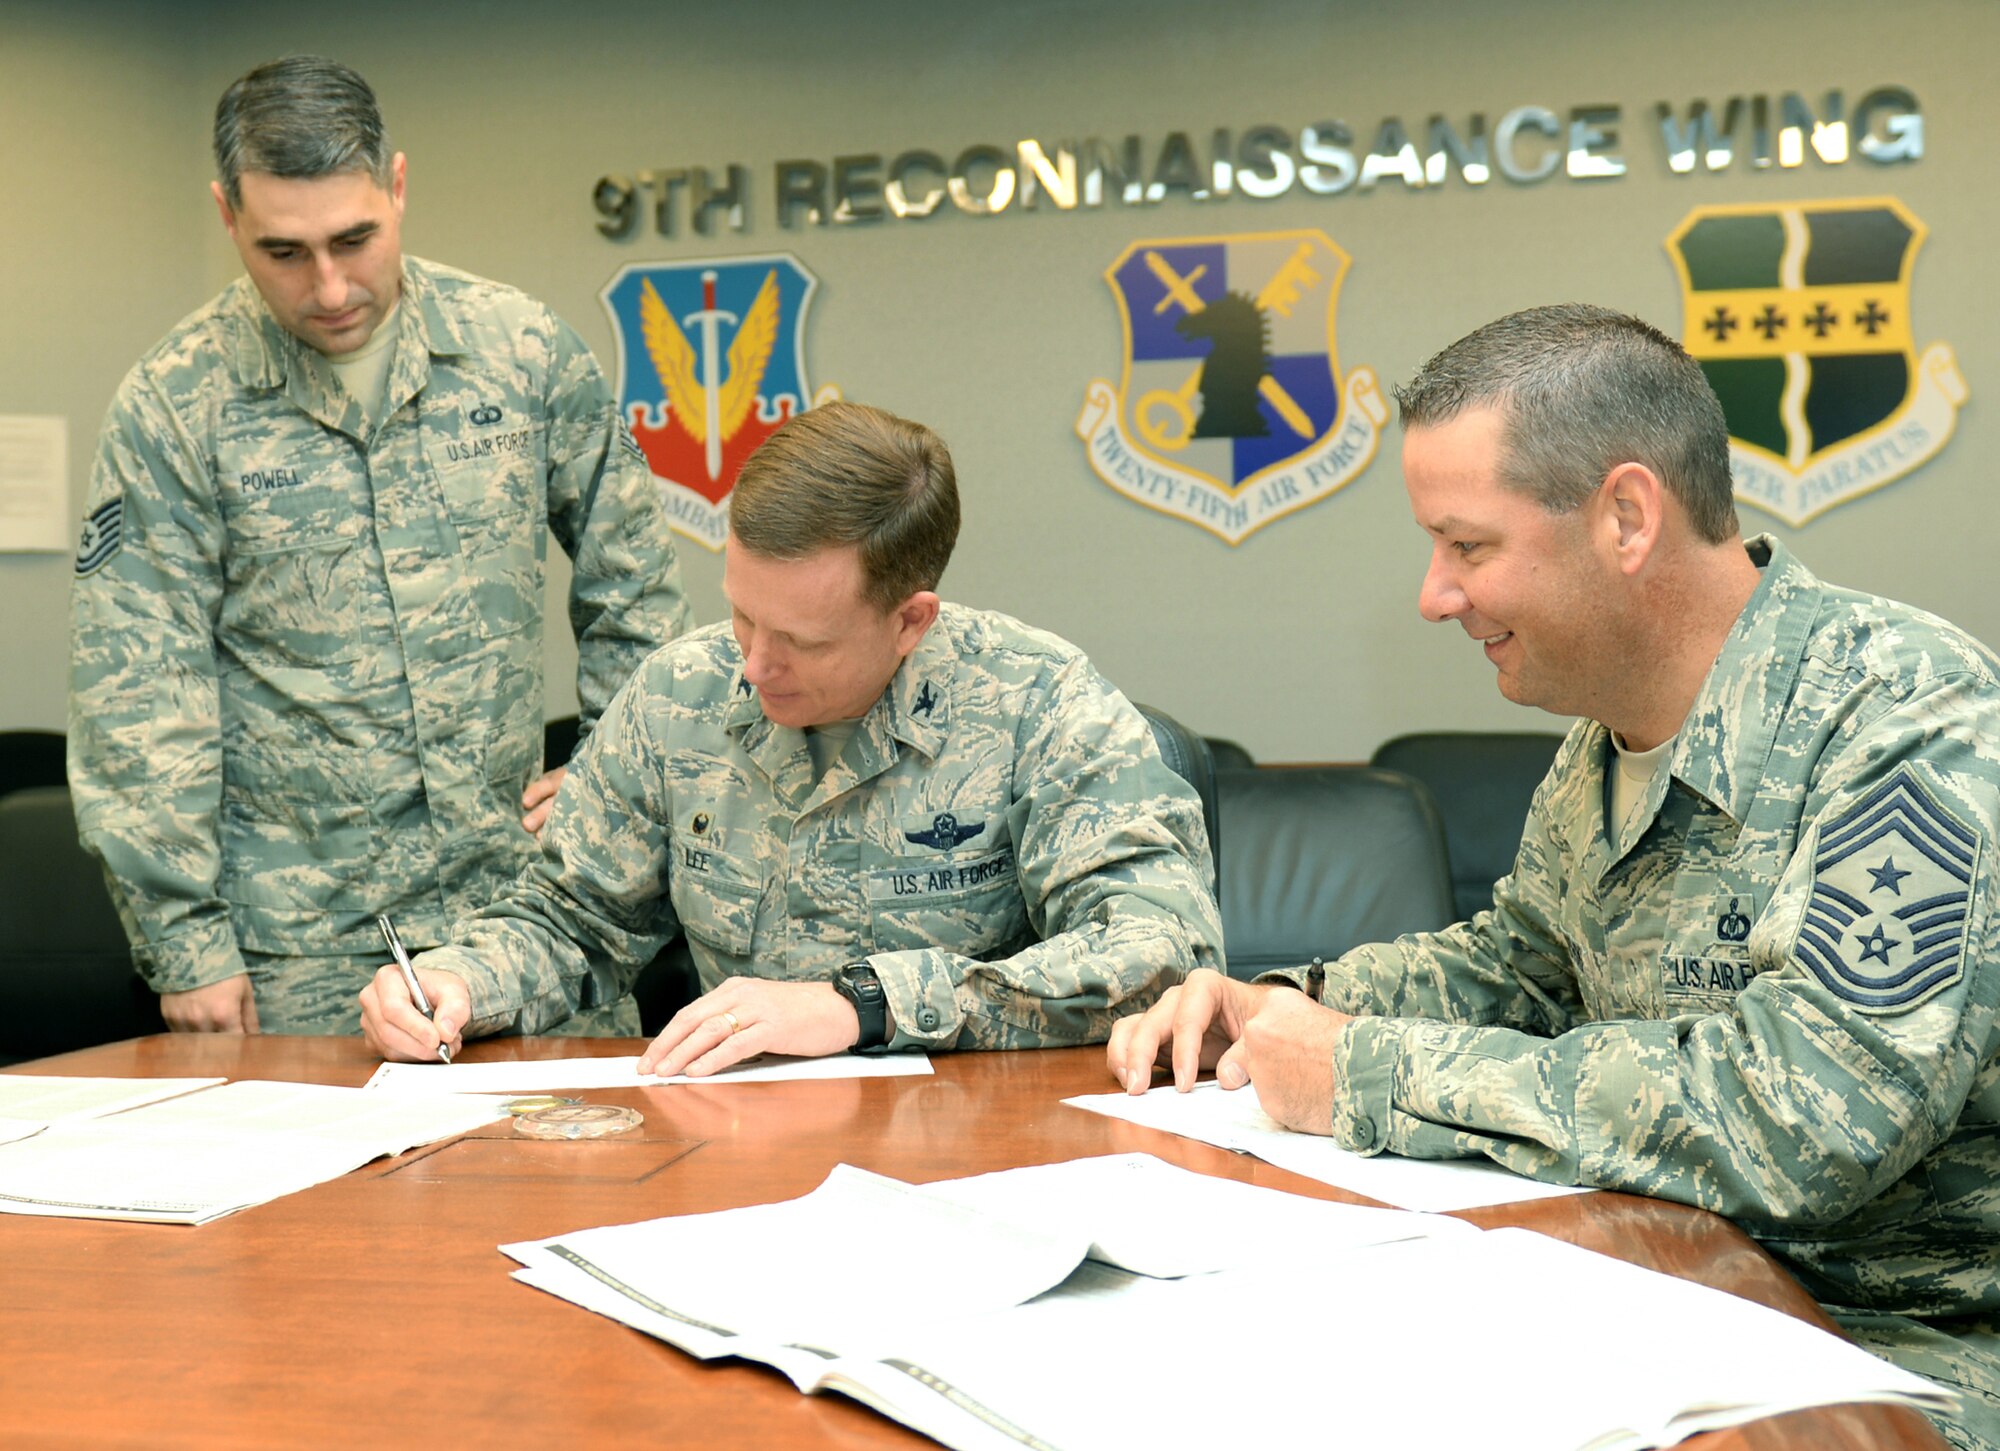 Col. Douglas Lee (center), 9th Reconnaissance Wing commander, and Command Chief Master Sgt. Randy Kwiatkowski (right), 9 RW command chief, sign their Combined Federal Campaign donations Dec. 1, 2015. The CFC is the only authorized solicitation of Federal employees in the workplace on behalf of charitable organizations. (U.S. Air Force photo by Robert Scott)